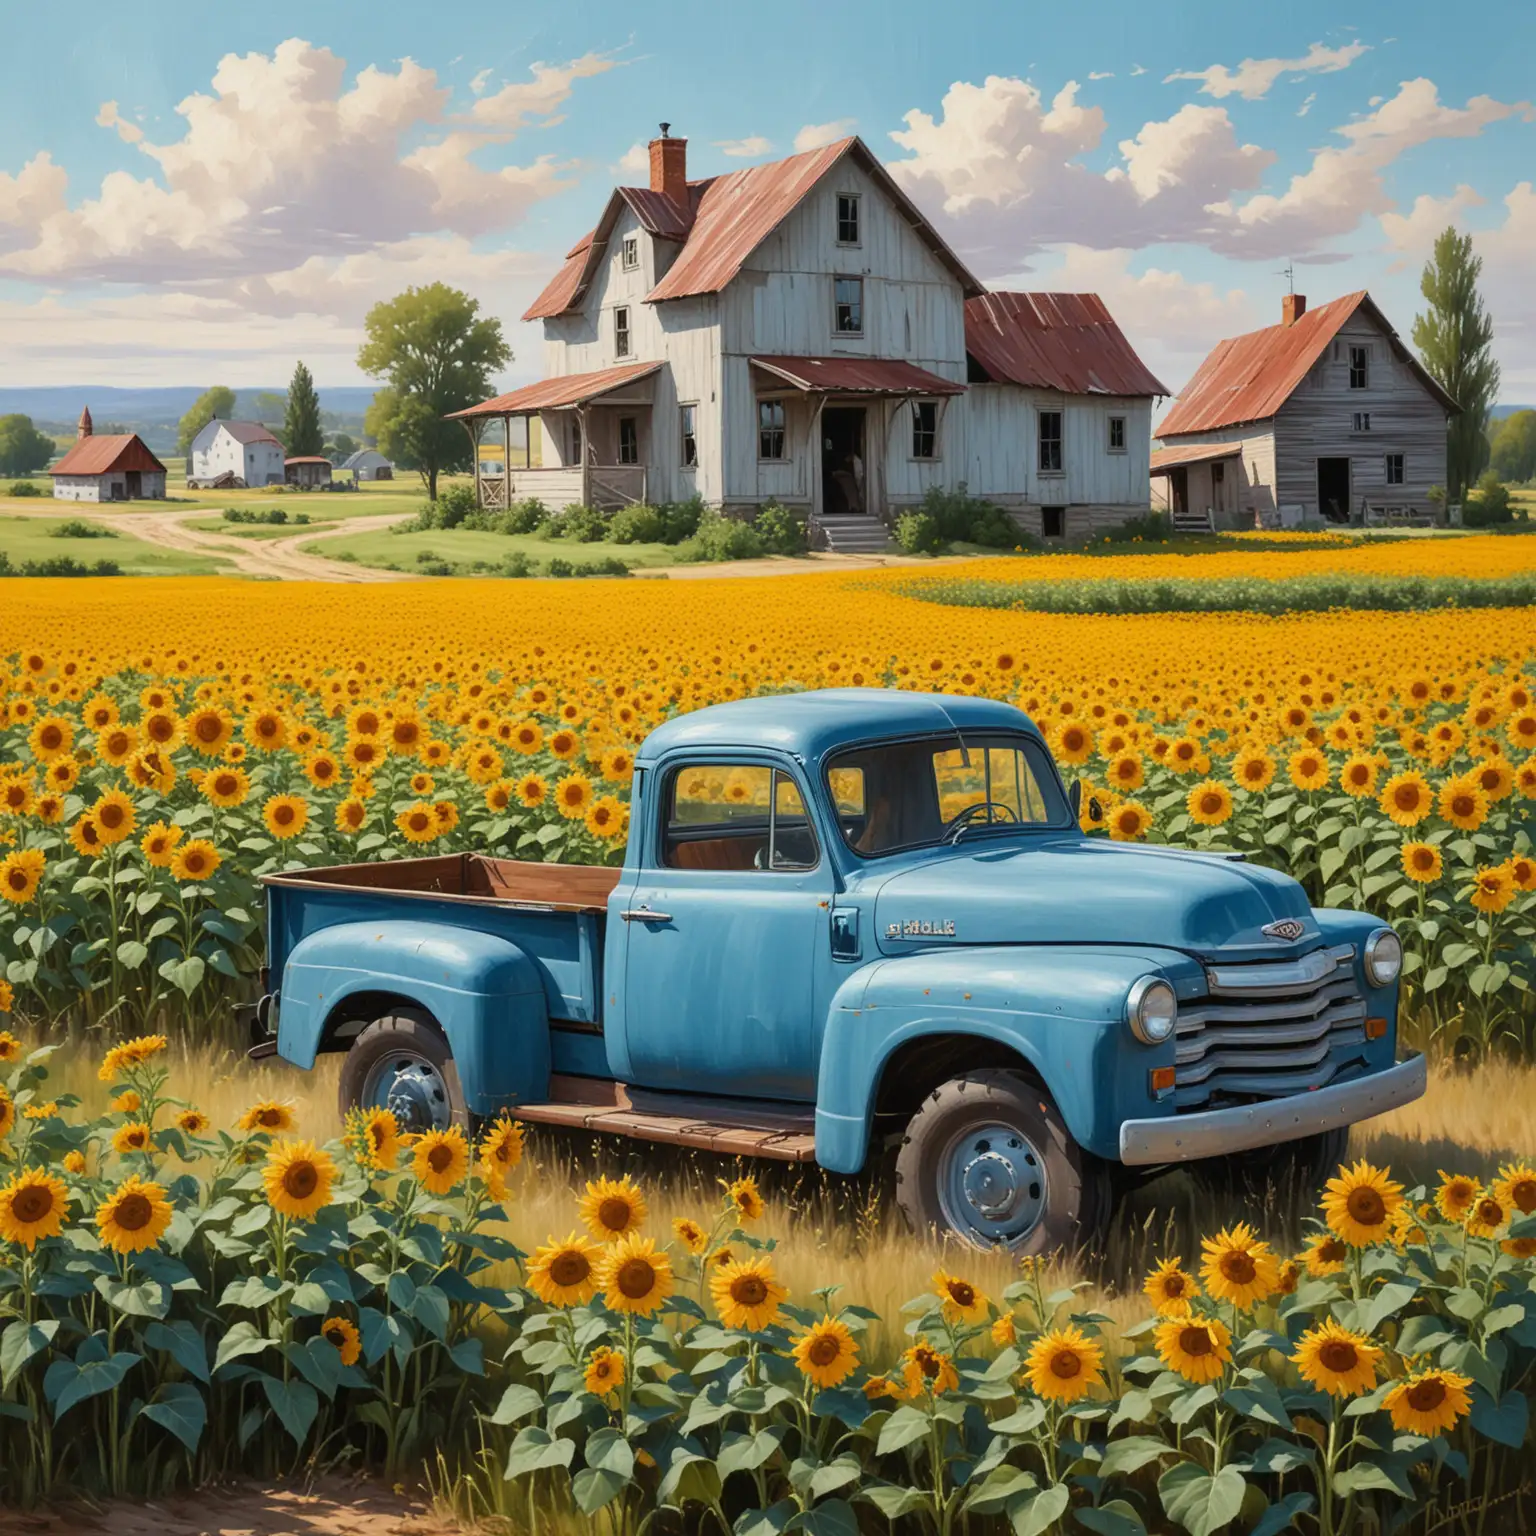 Old Blue Truck and Sunflowers Field with Farmhouse View